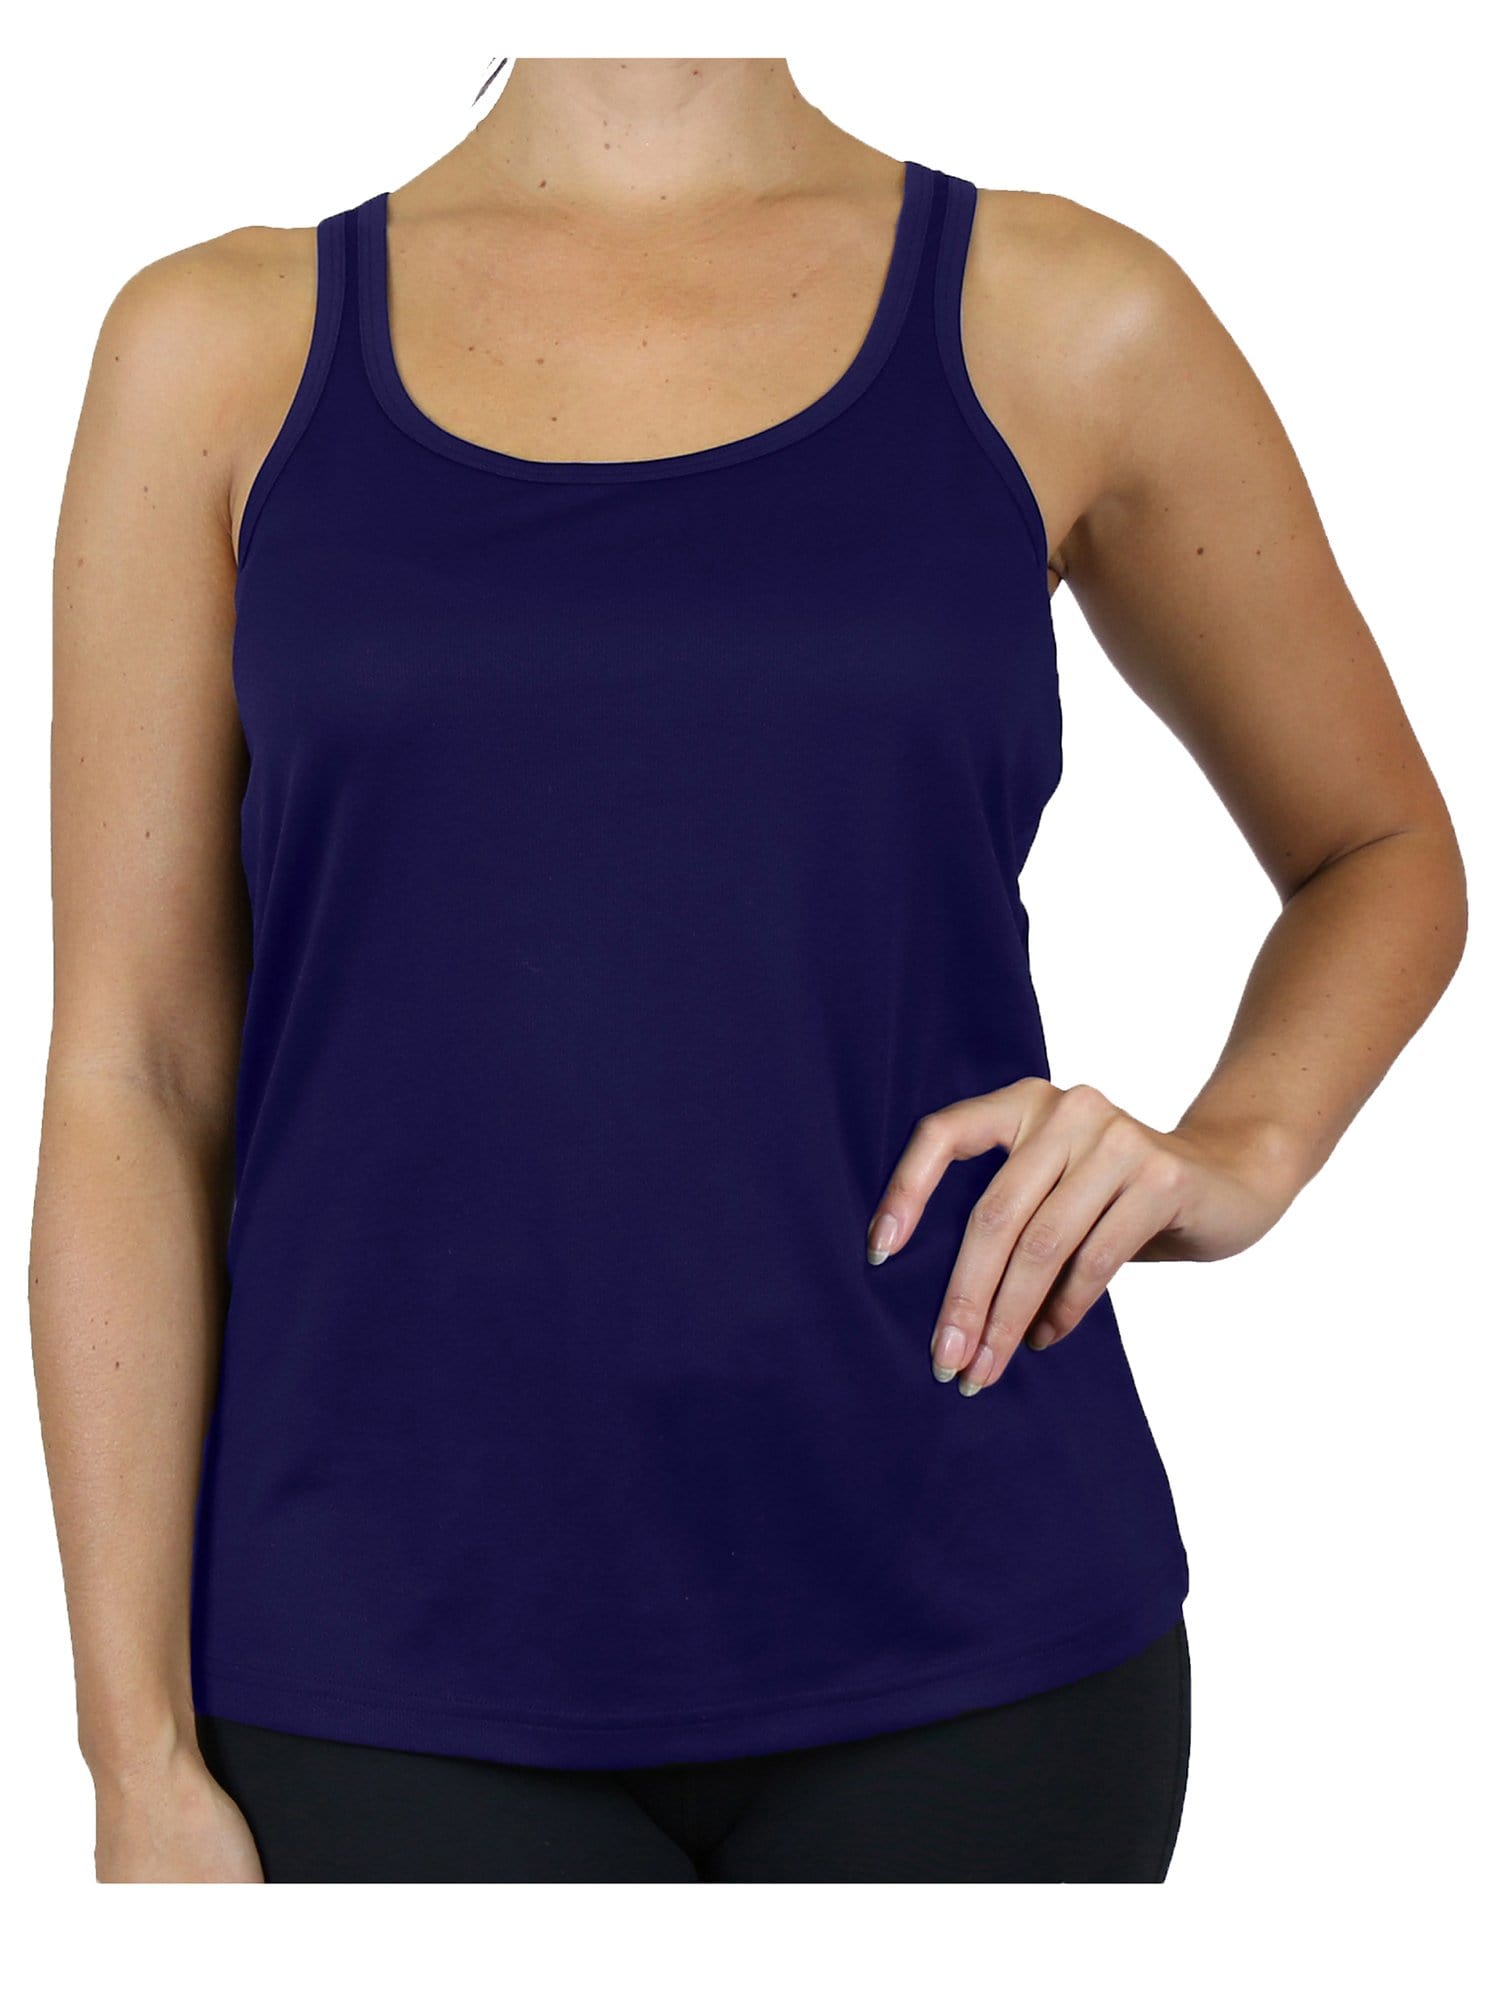 Moisture Wicking Womens Racerback Tanks (S-3XL) - GalaxybyHarvic